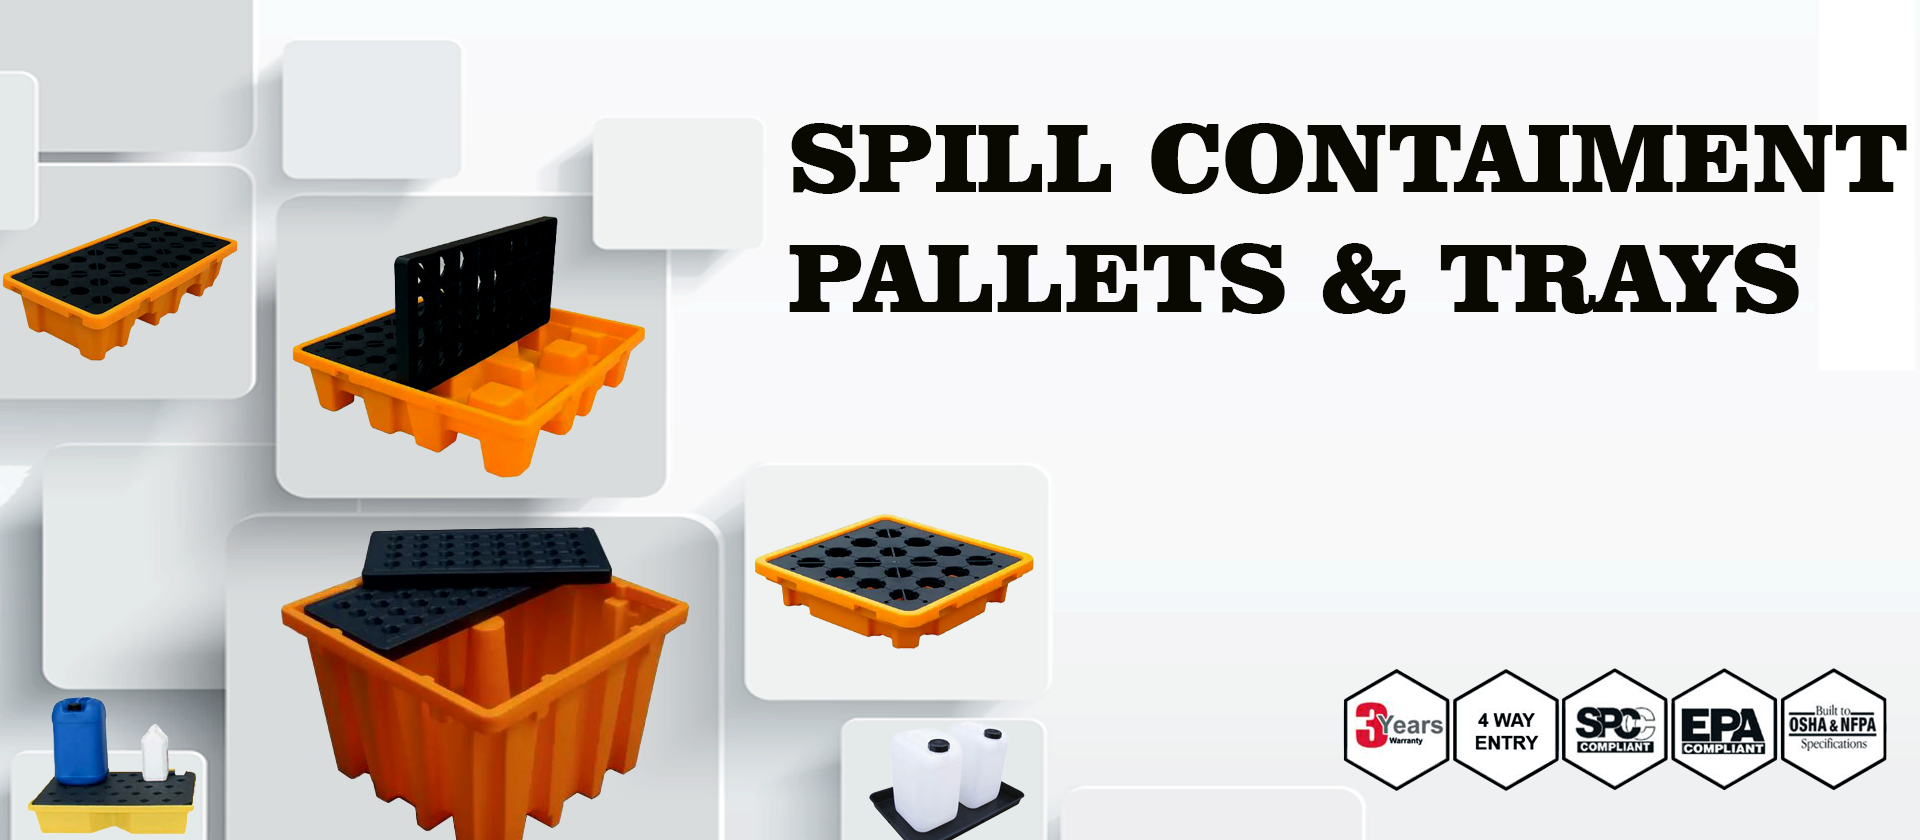 BANNER MASTER FILE FOR AMIT- SPILL PALLETS AND TRAYS